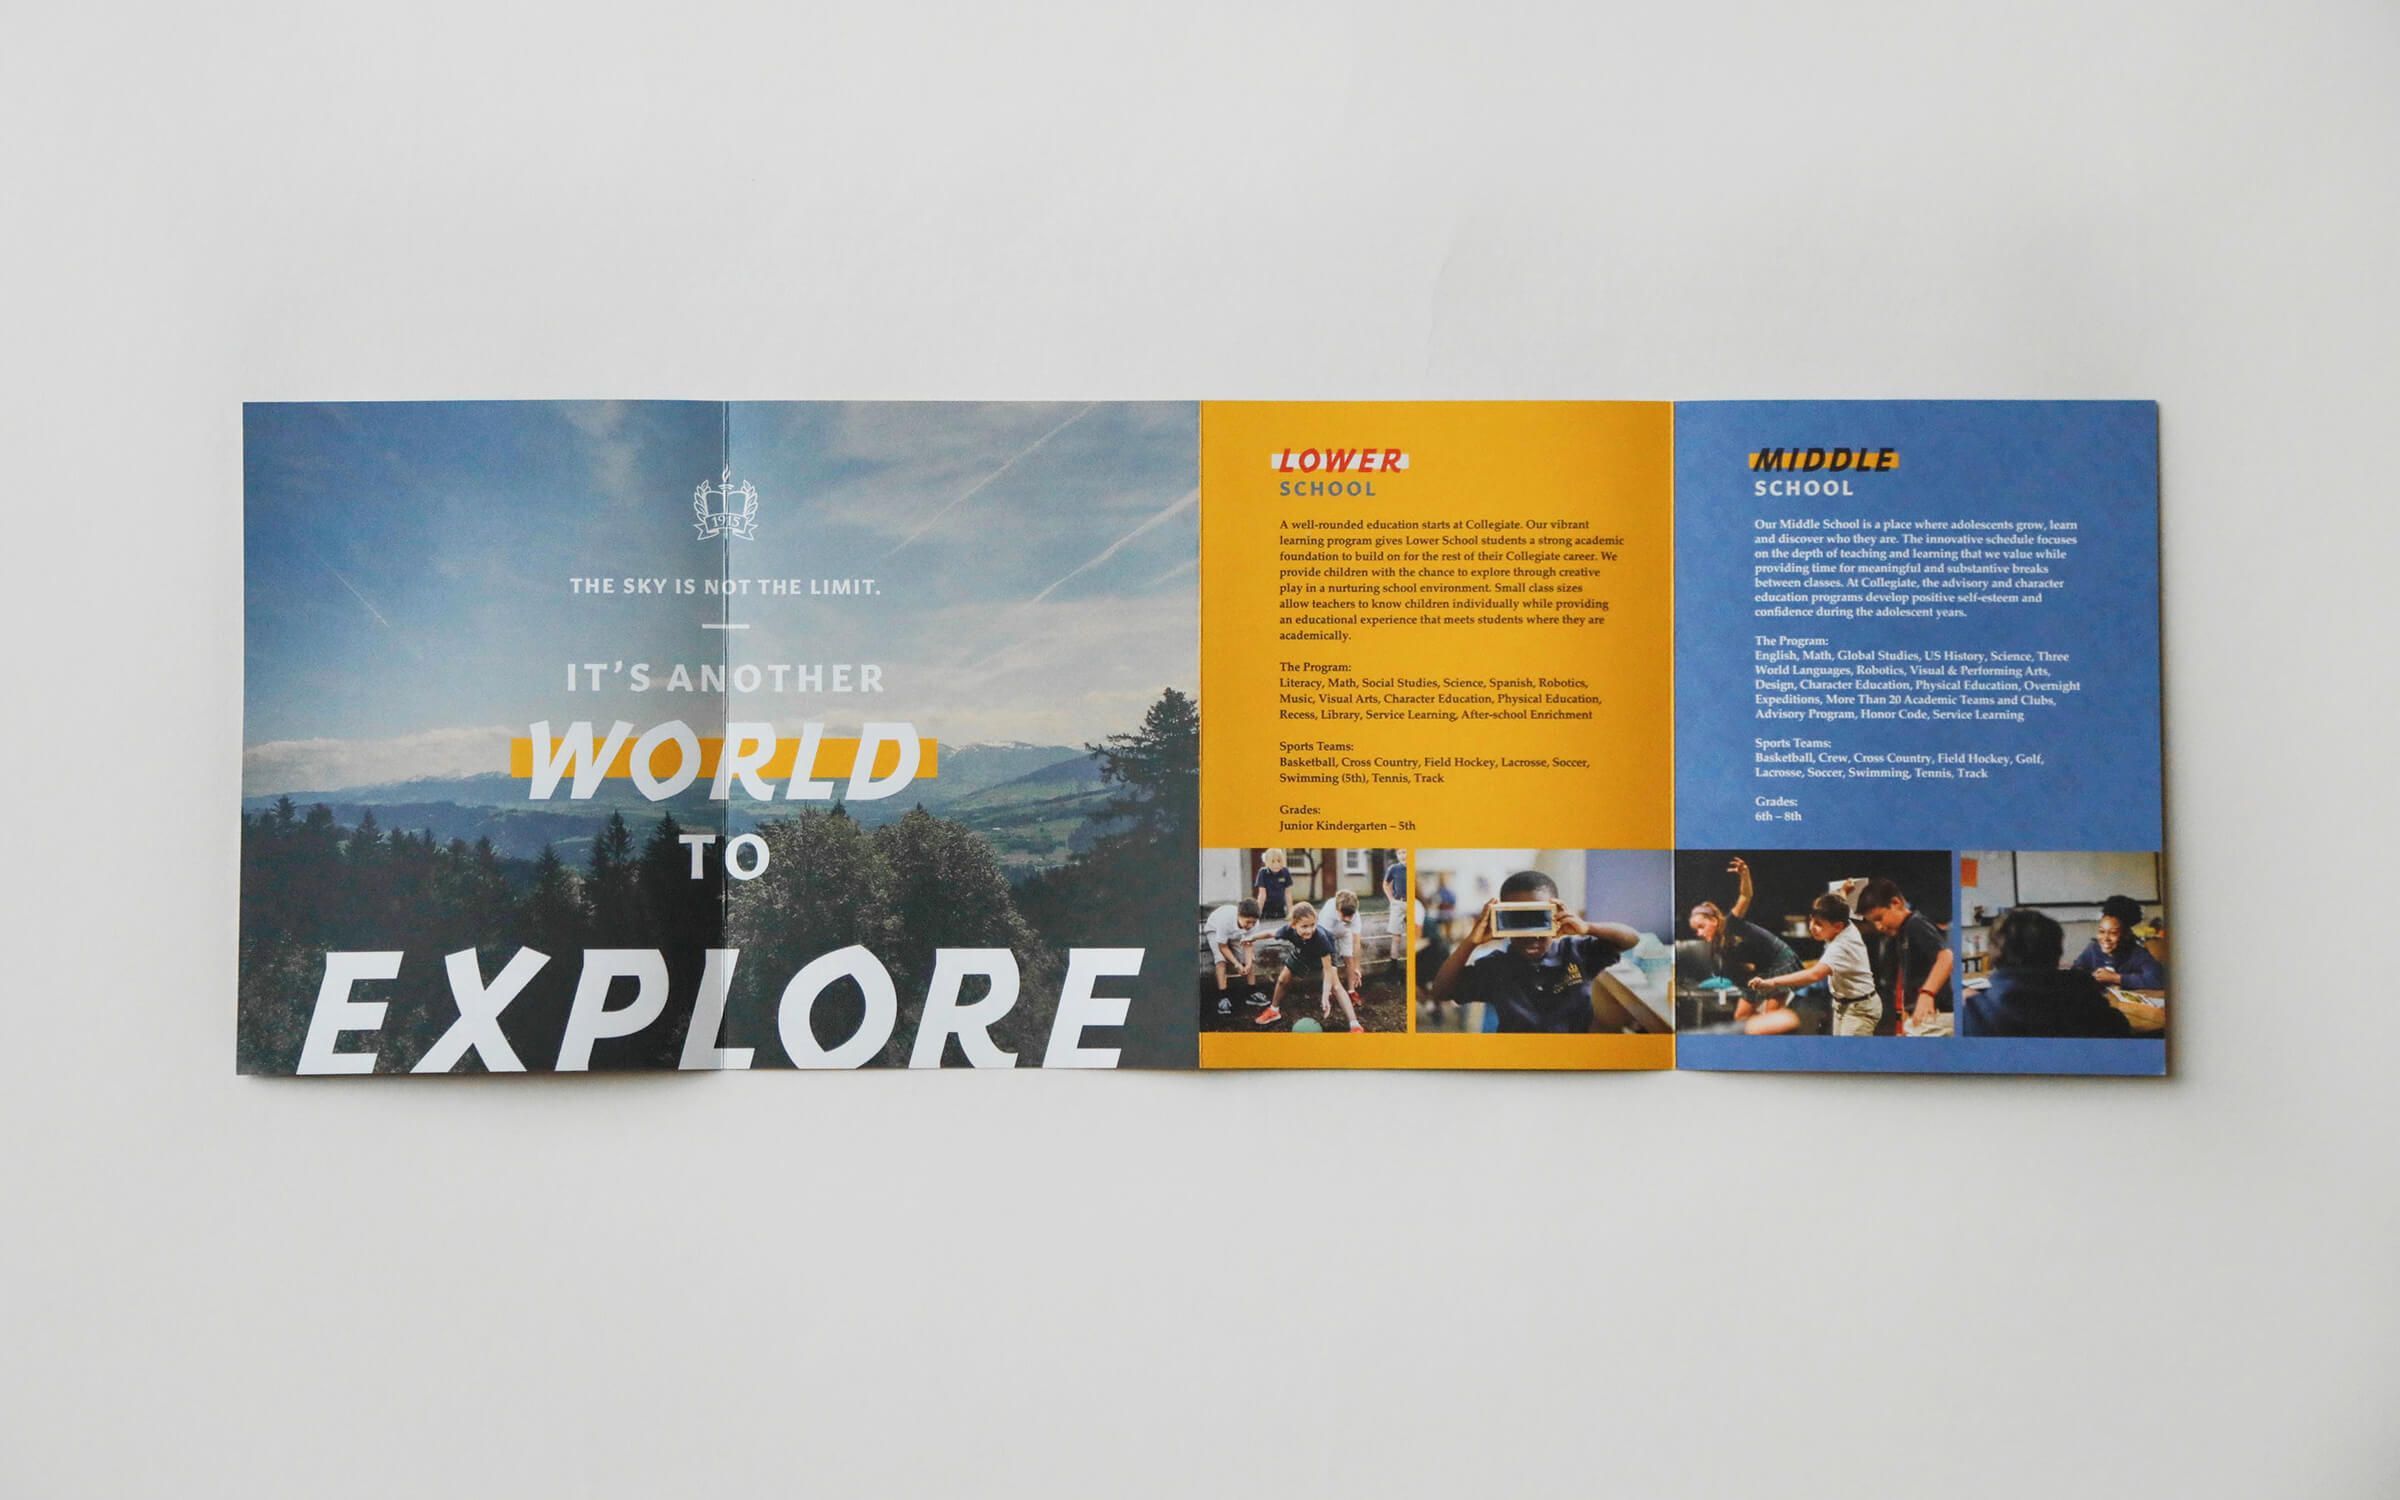 Unfolded brochure. "It's another world to explore."